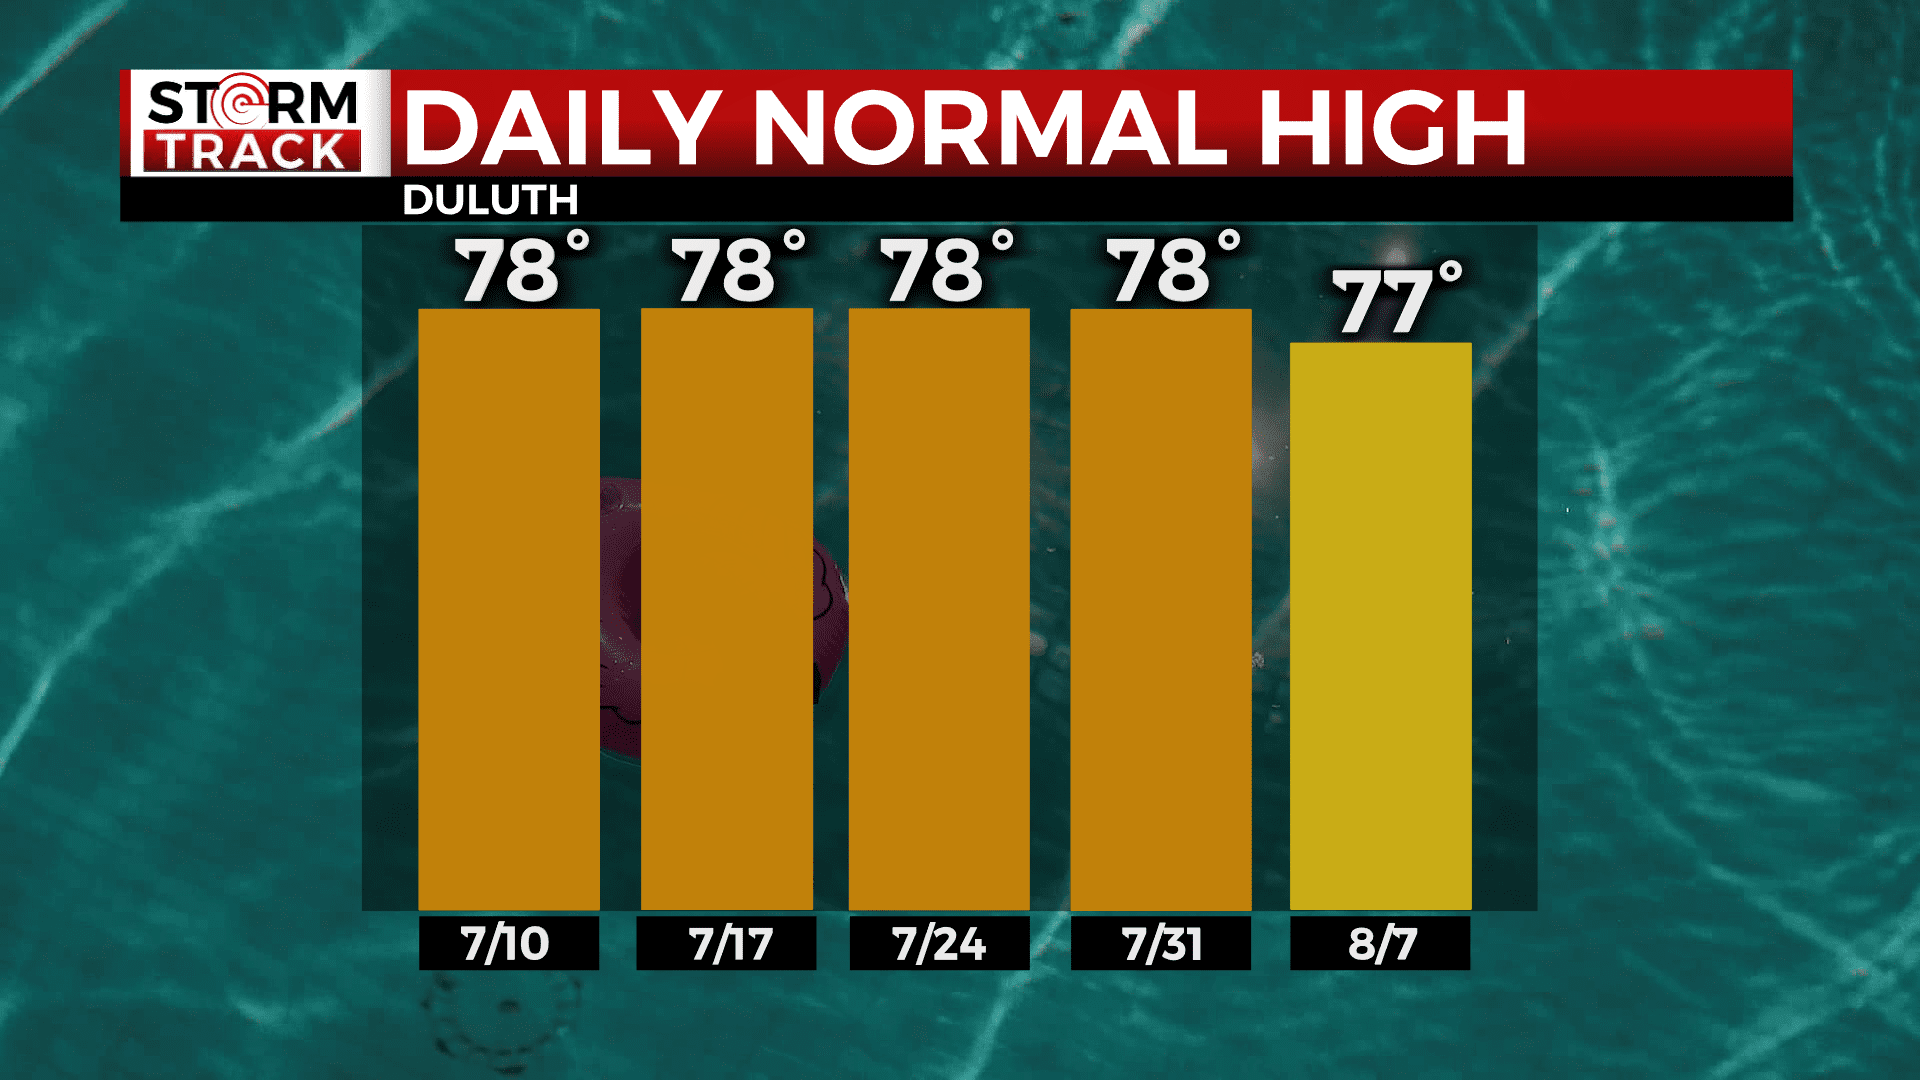 Duluth's daily normal high temperatures from July 10 to August 7